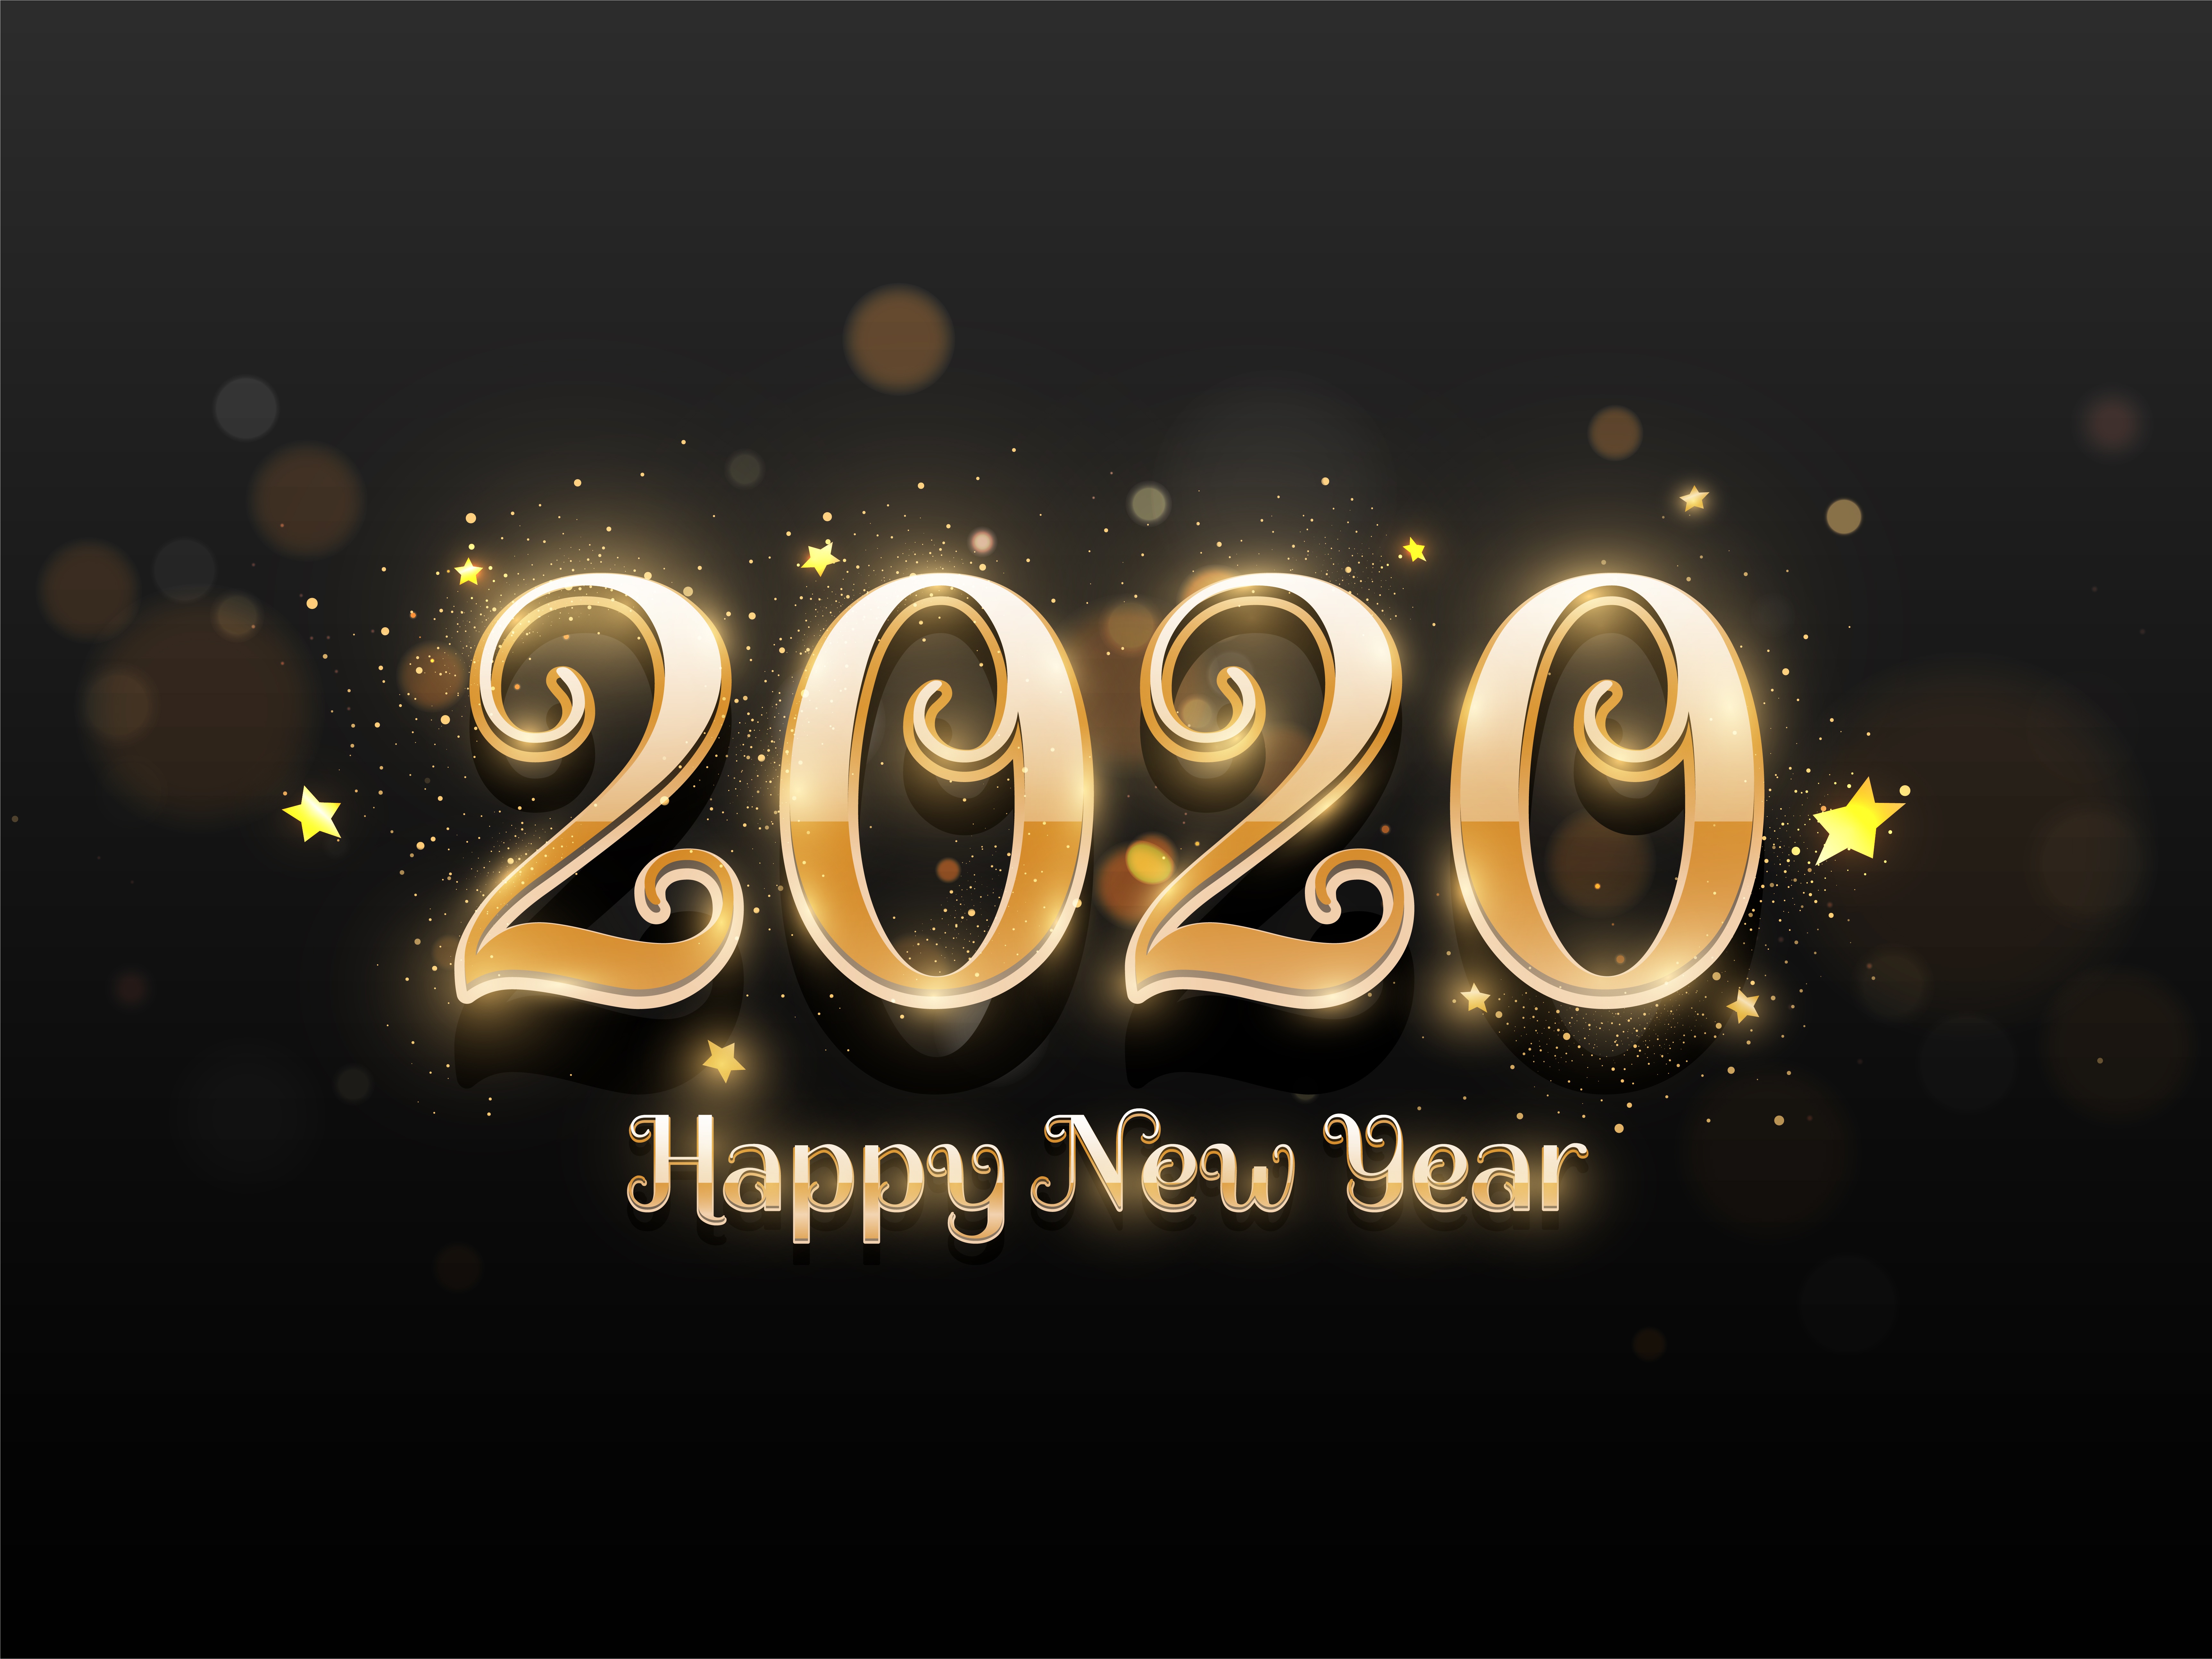 holiday, new year 2020, happy new year, new year